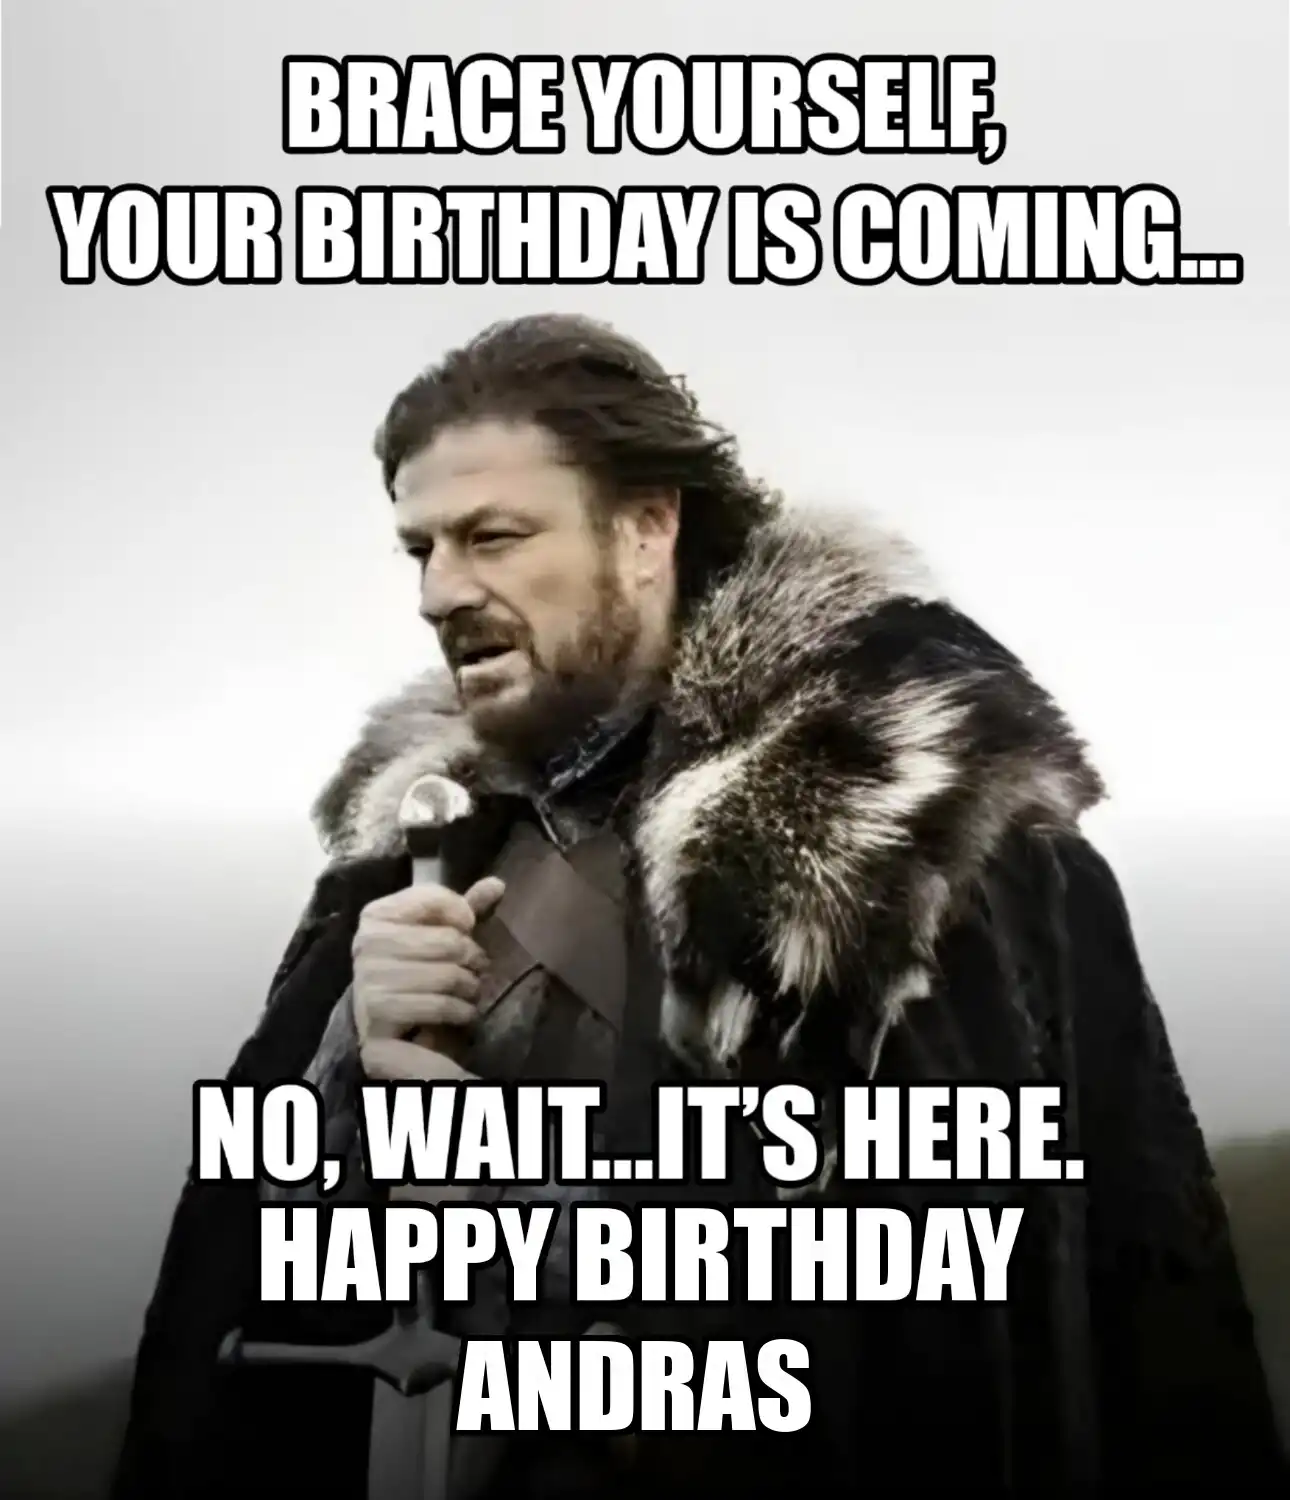 Happy Birthday Andras Brace Yourself Your Birthday Is Coming Meme